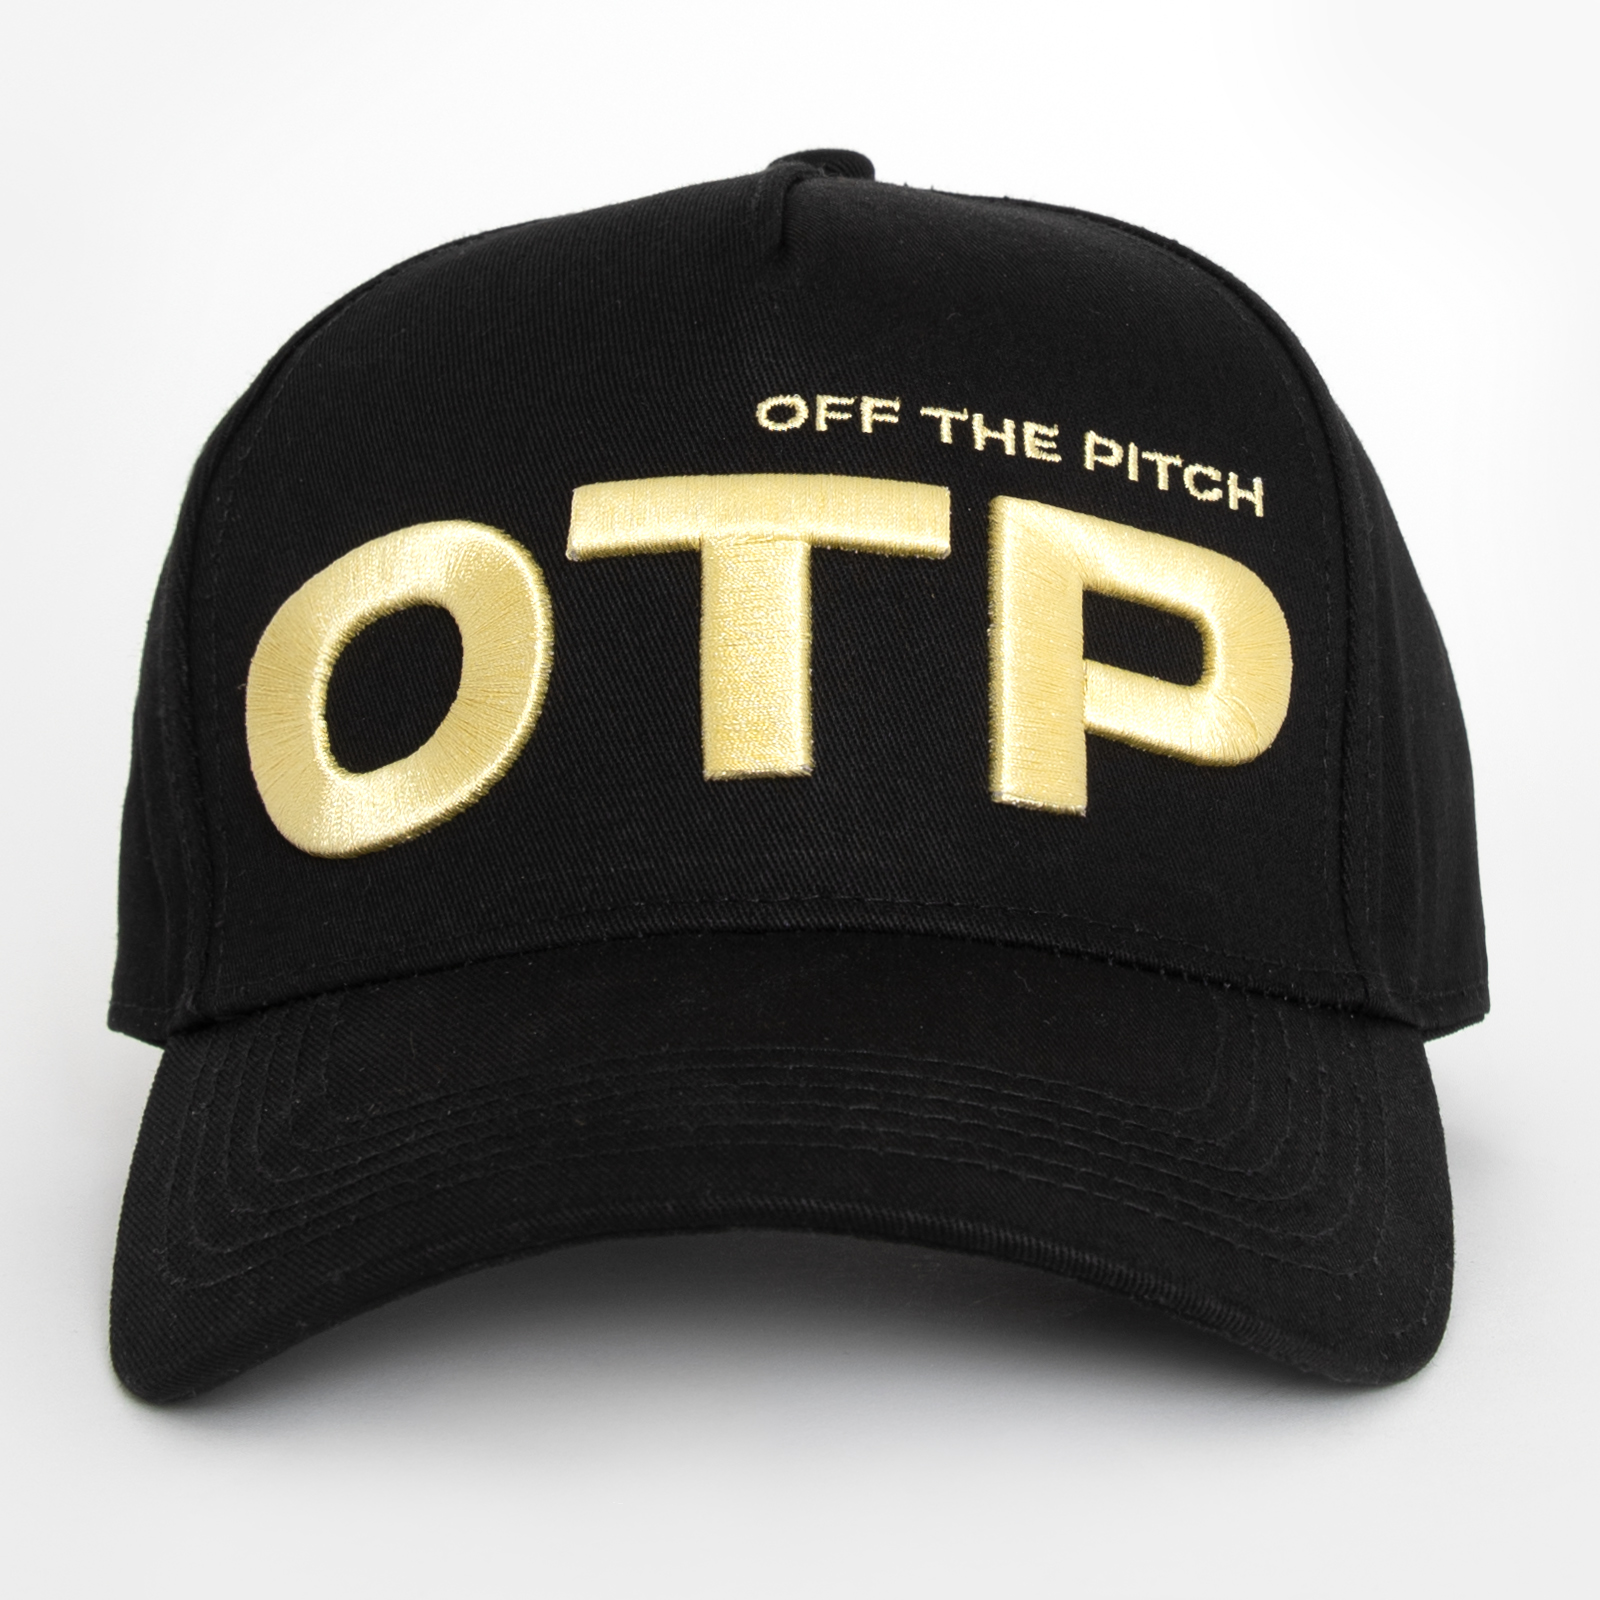 Off the Pitch Off-set Cap Black/Yellow
